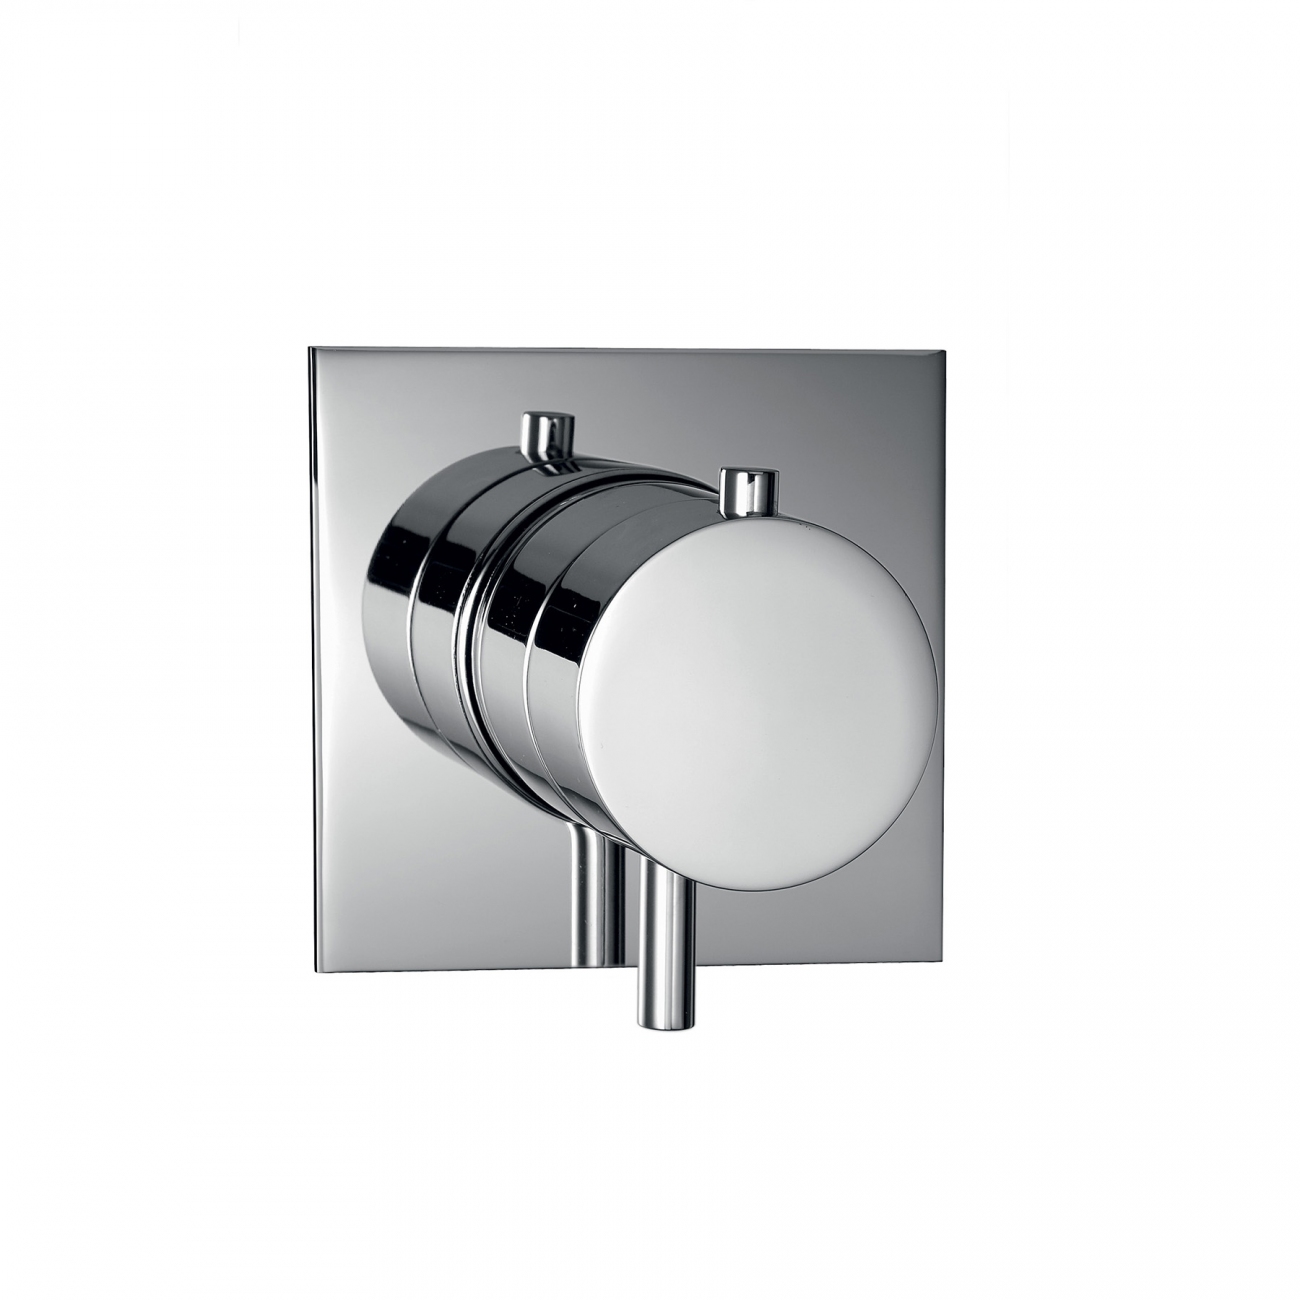 Treemme Philo thermostatic shower mixer